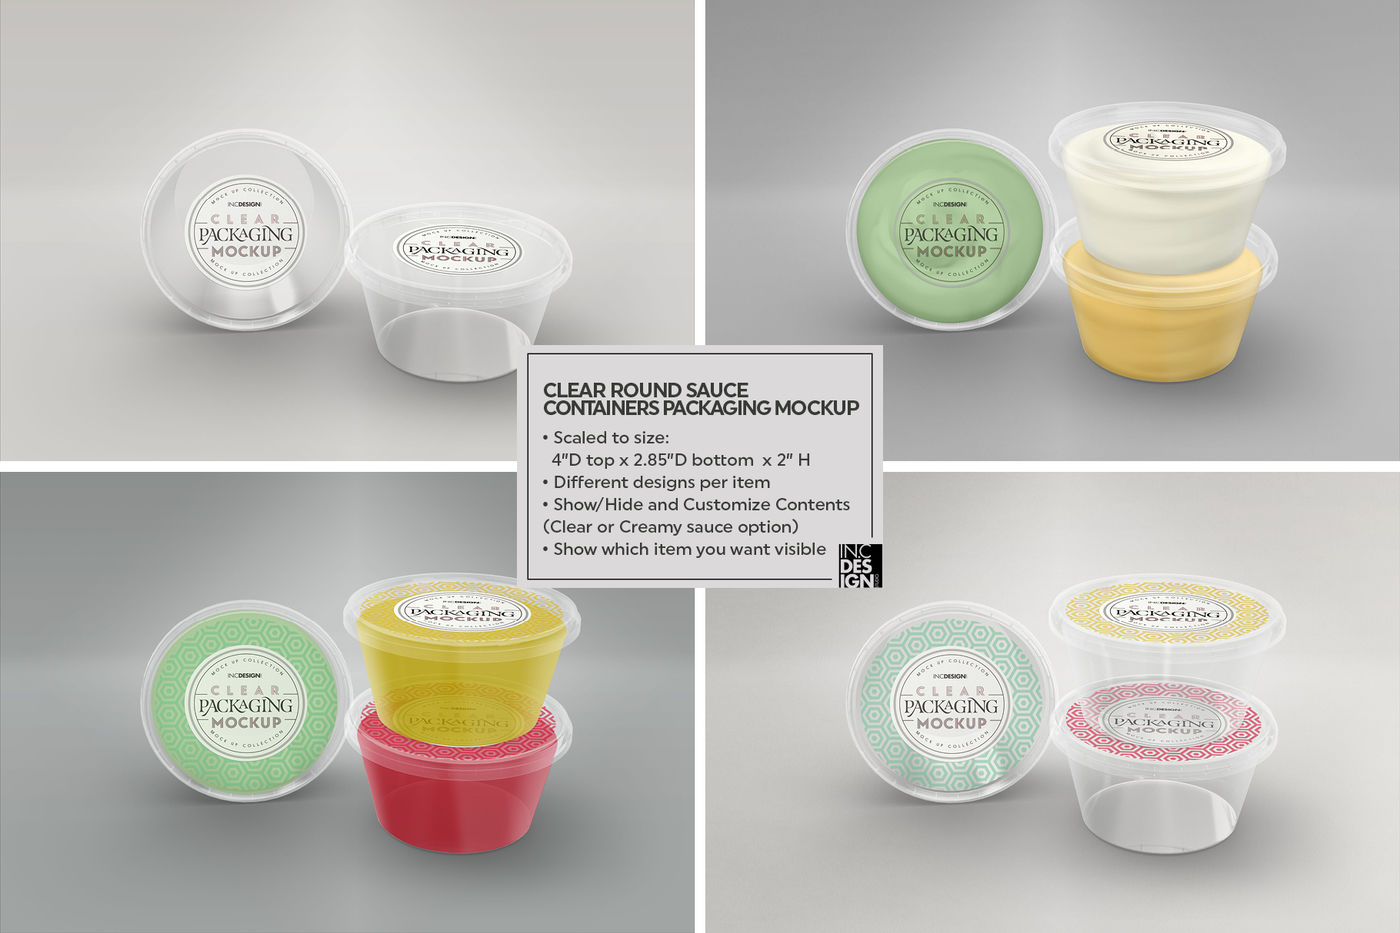 Download Clear Round Sauce Containers Packaging Mockup By Inc Design Studio Thehungryjpeg Com